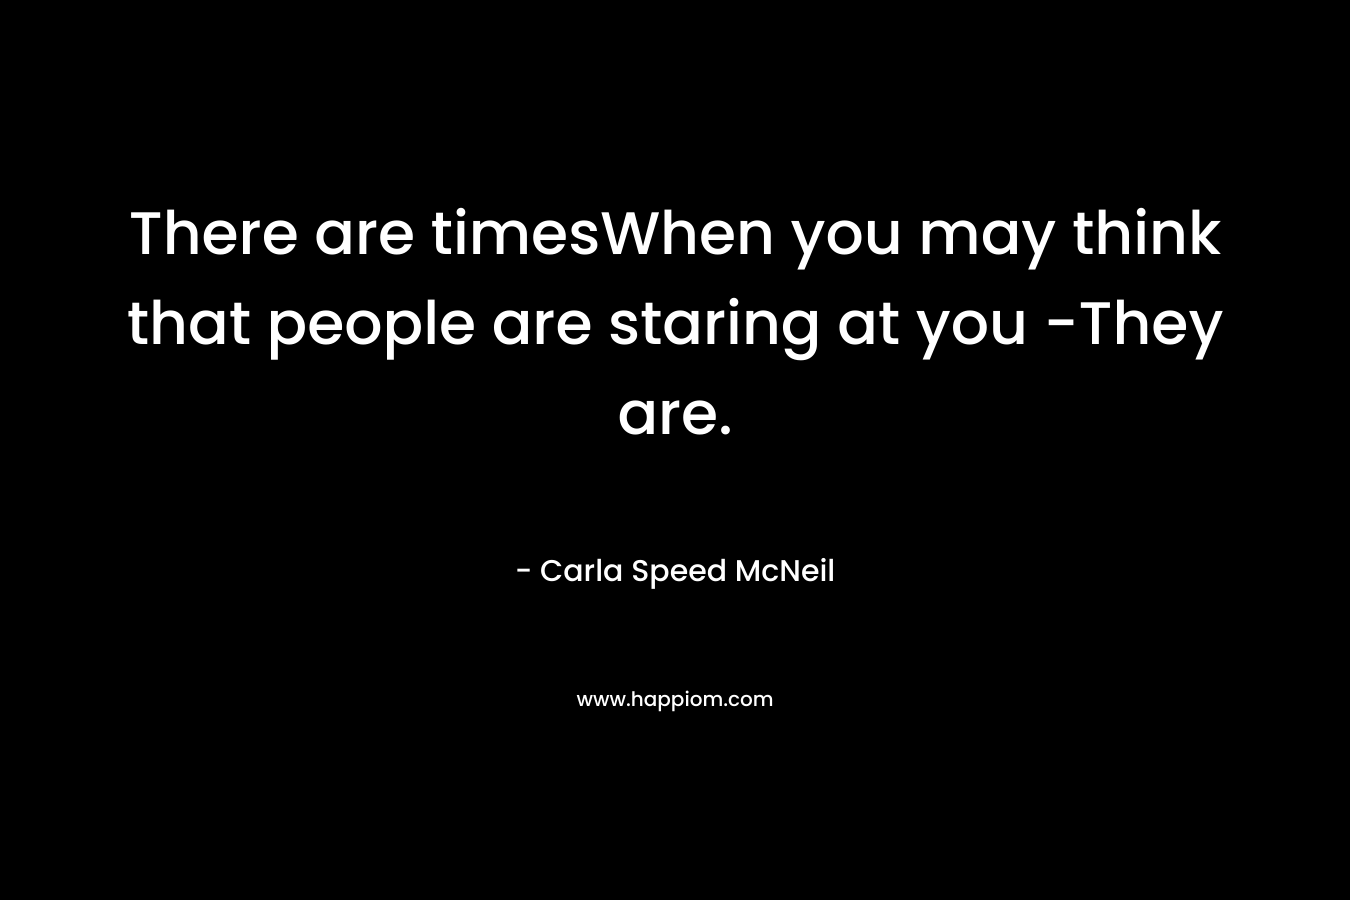 There are timesWhen you may think that people are staring at you -They are.